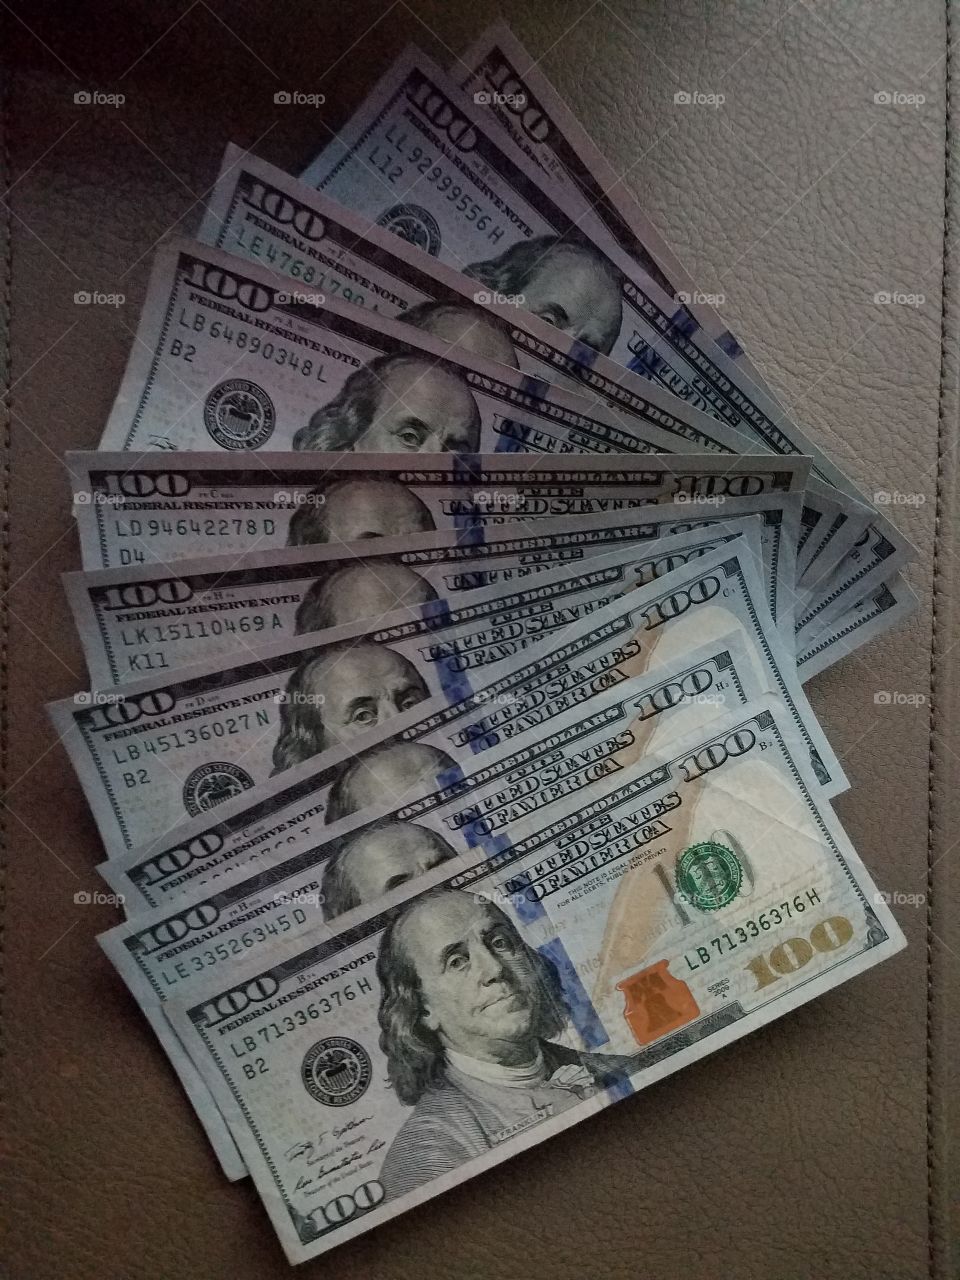 All About the Benjamin's